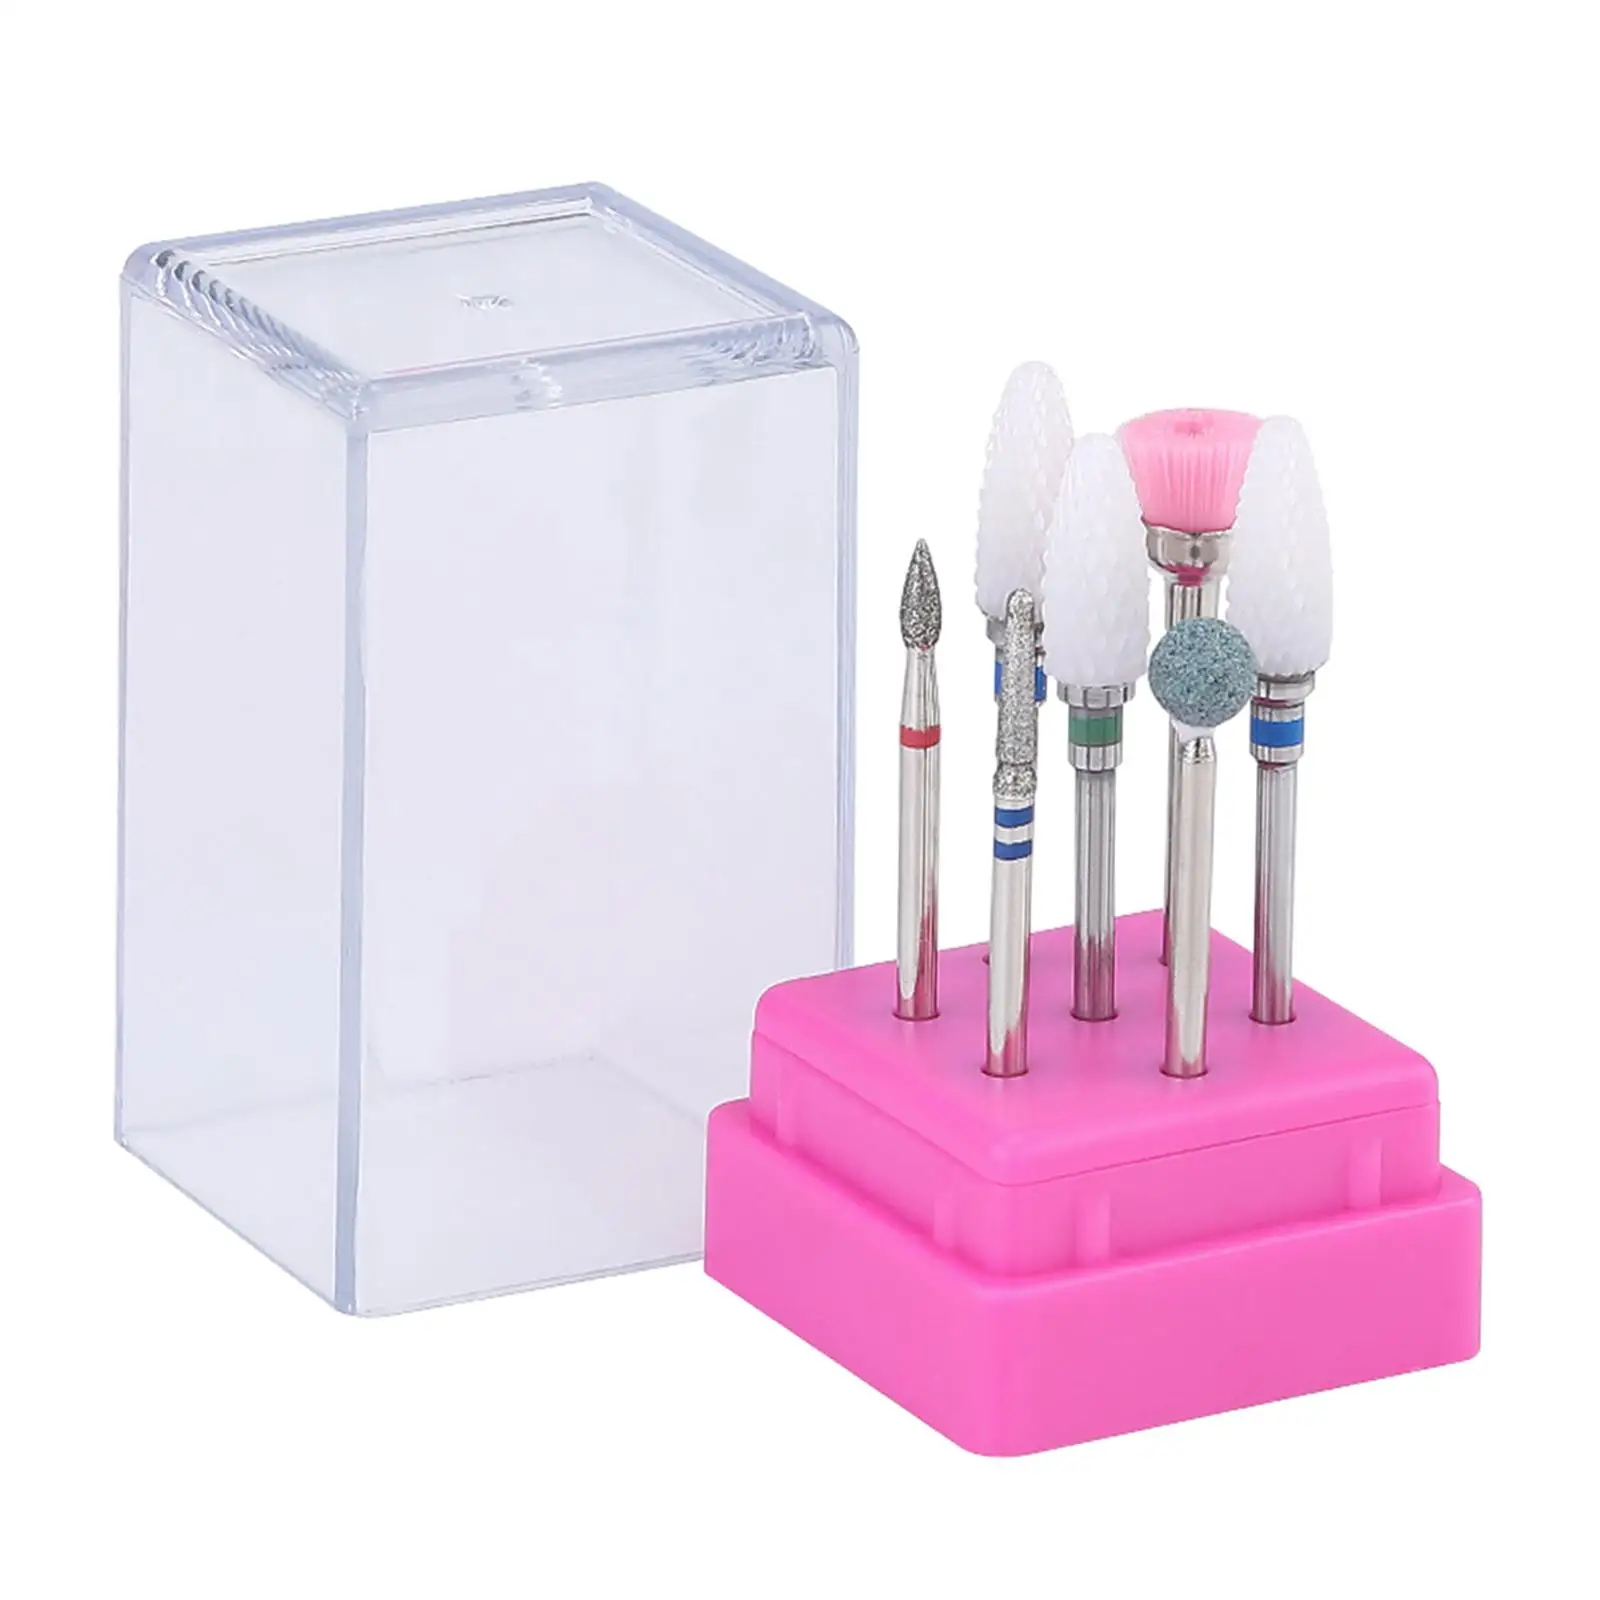 Nail Drill Bits Kit with Holder Box Polishing File Grinding Heads for Reshape Remove Gel Nails